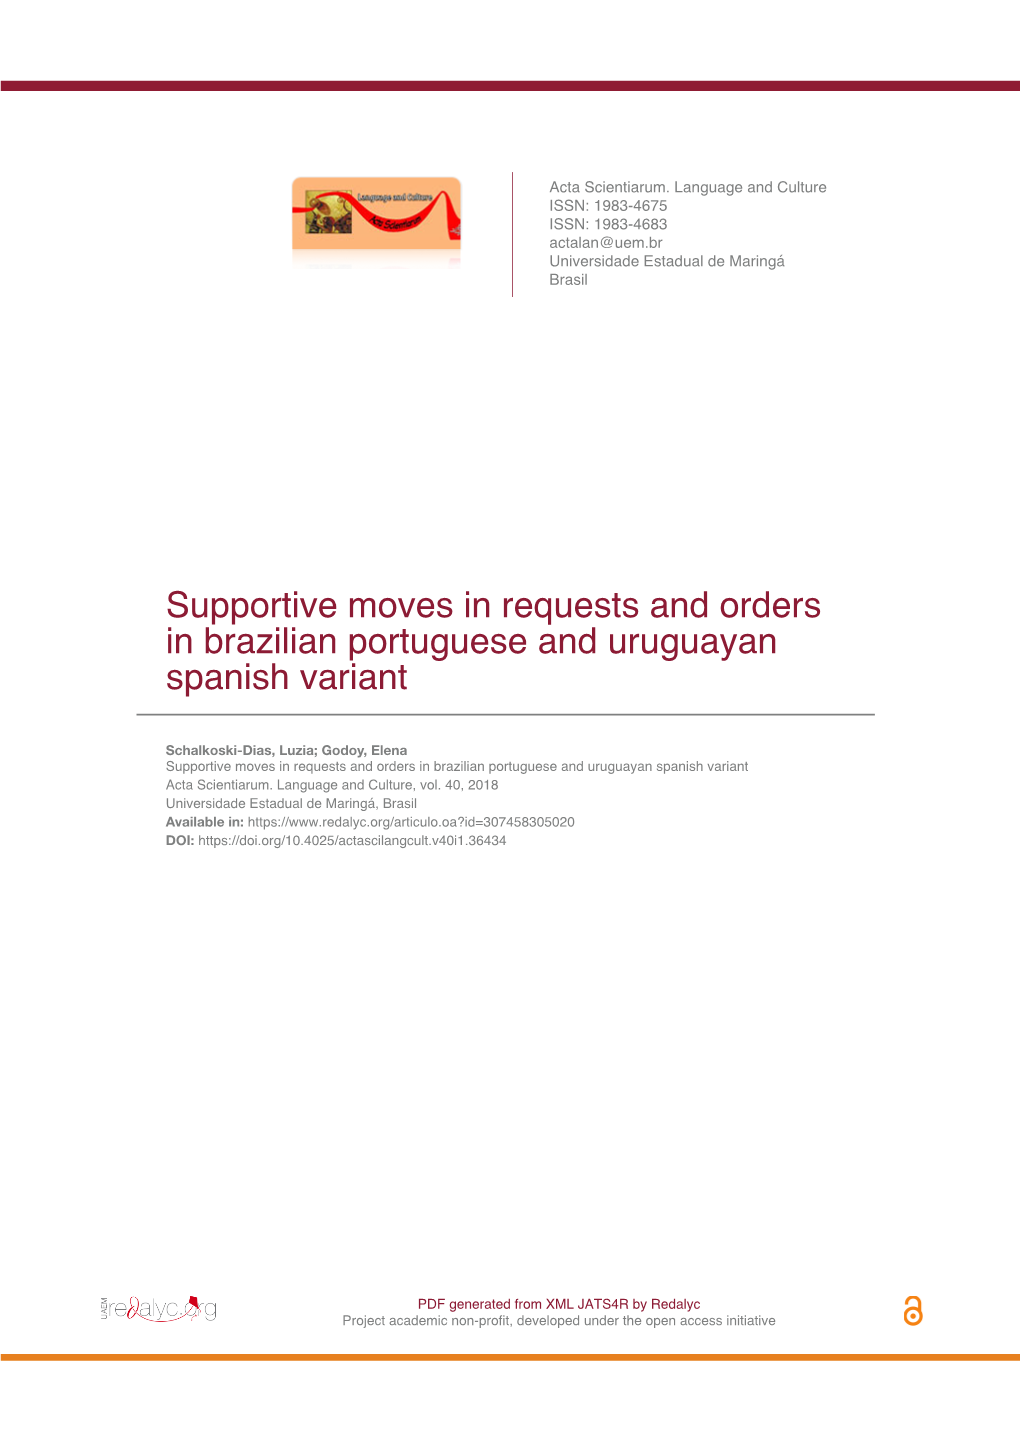 Supportive Moves in Requests and Orders in Brazilian Portuguese and Uruguayan Spanish Variant